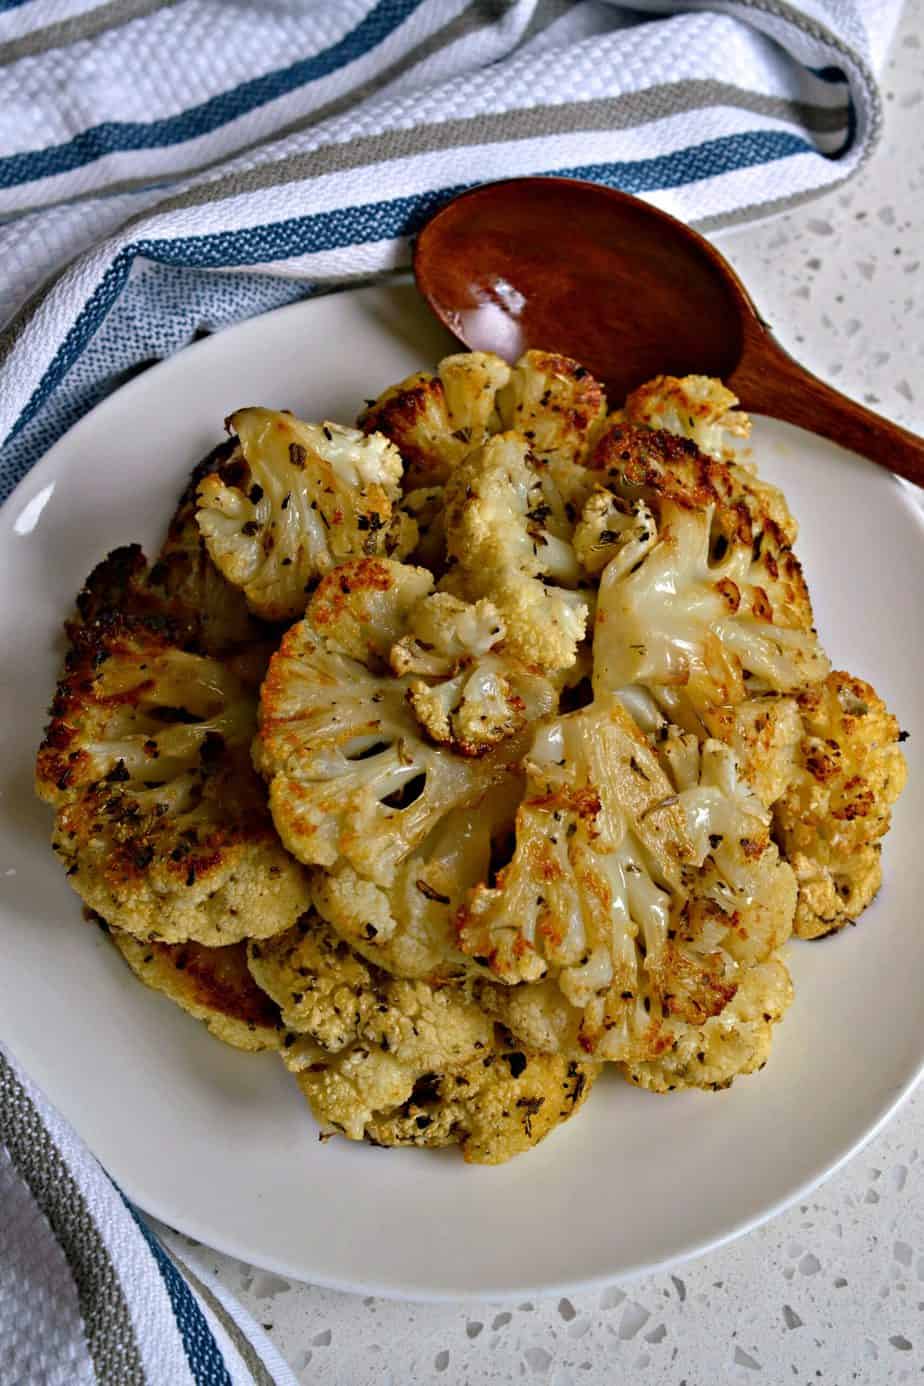 This roasted cauliflower side dish is made with wholesome ingredients like olive oil, Parmesan cheese, herbs and spices.